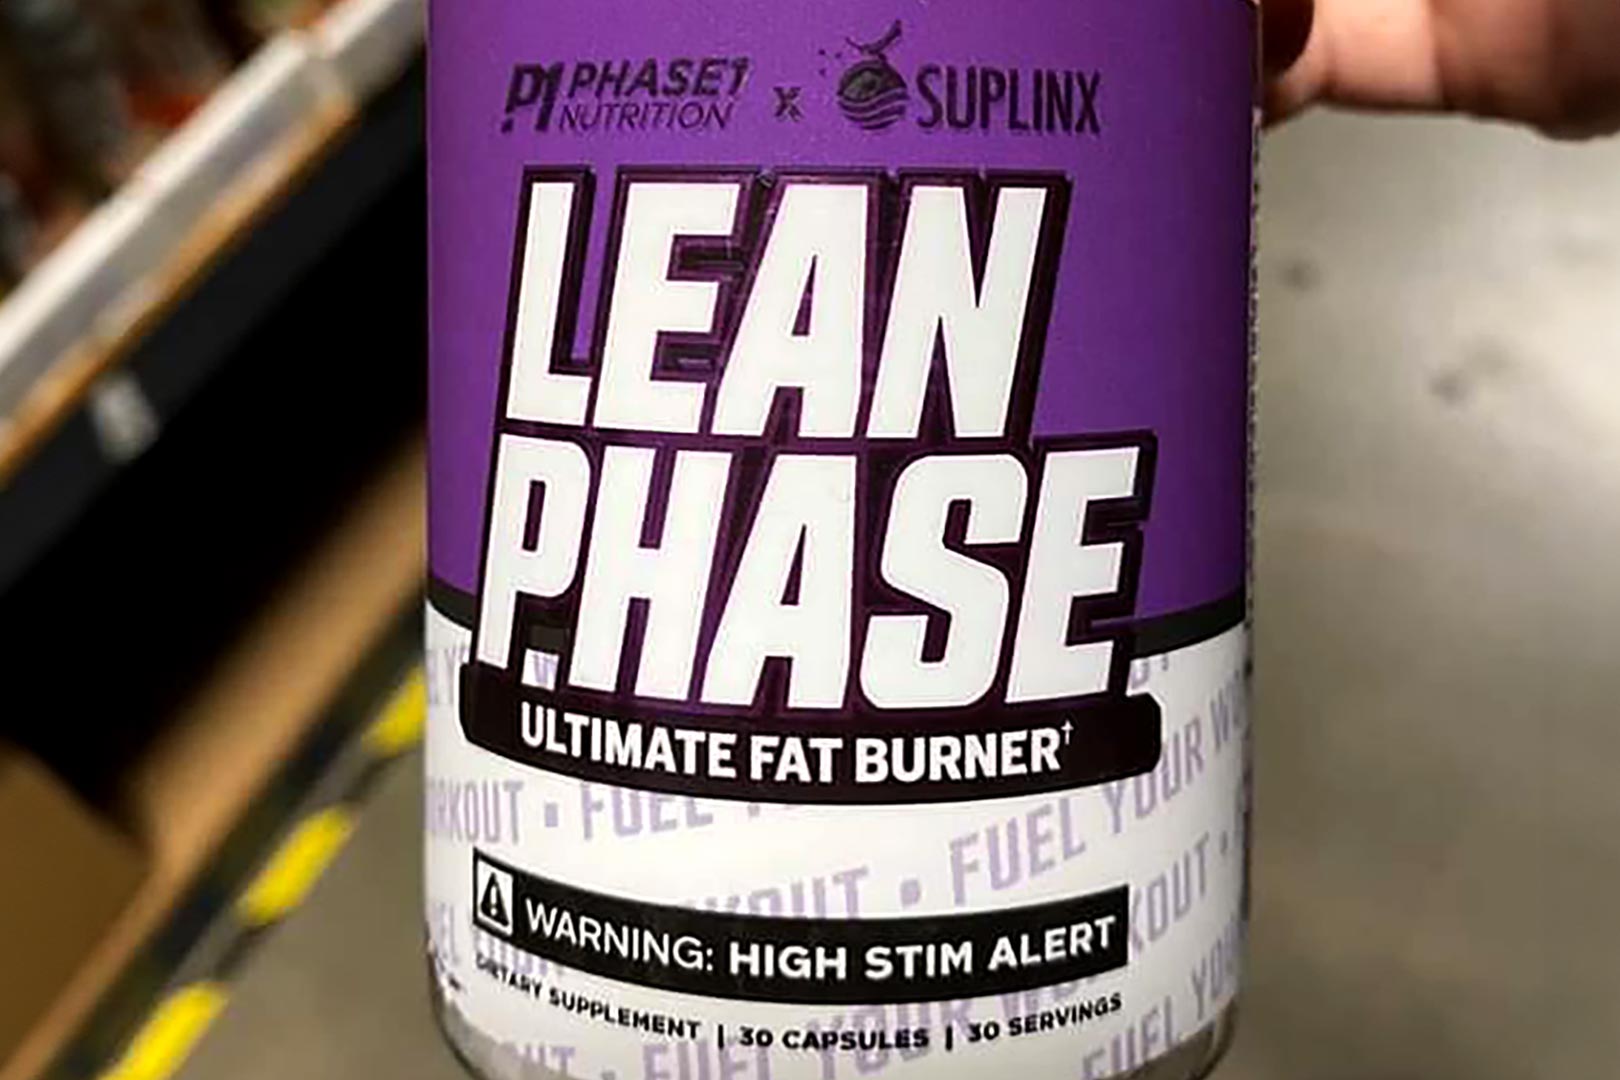 Phase One Nutrition X Suplinx Lean Phase